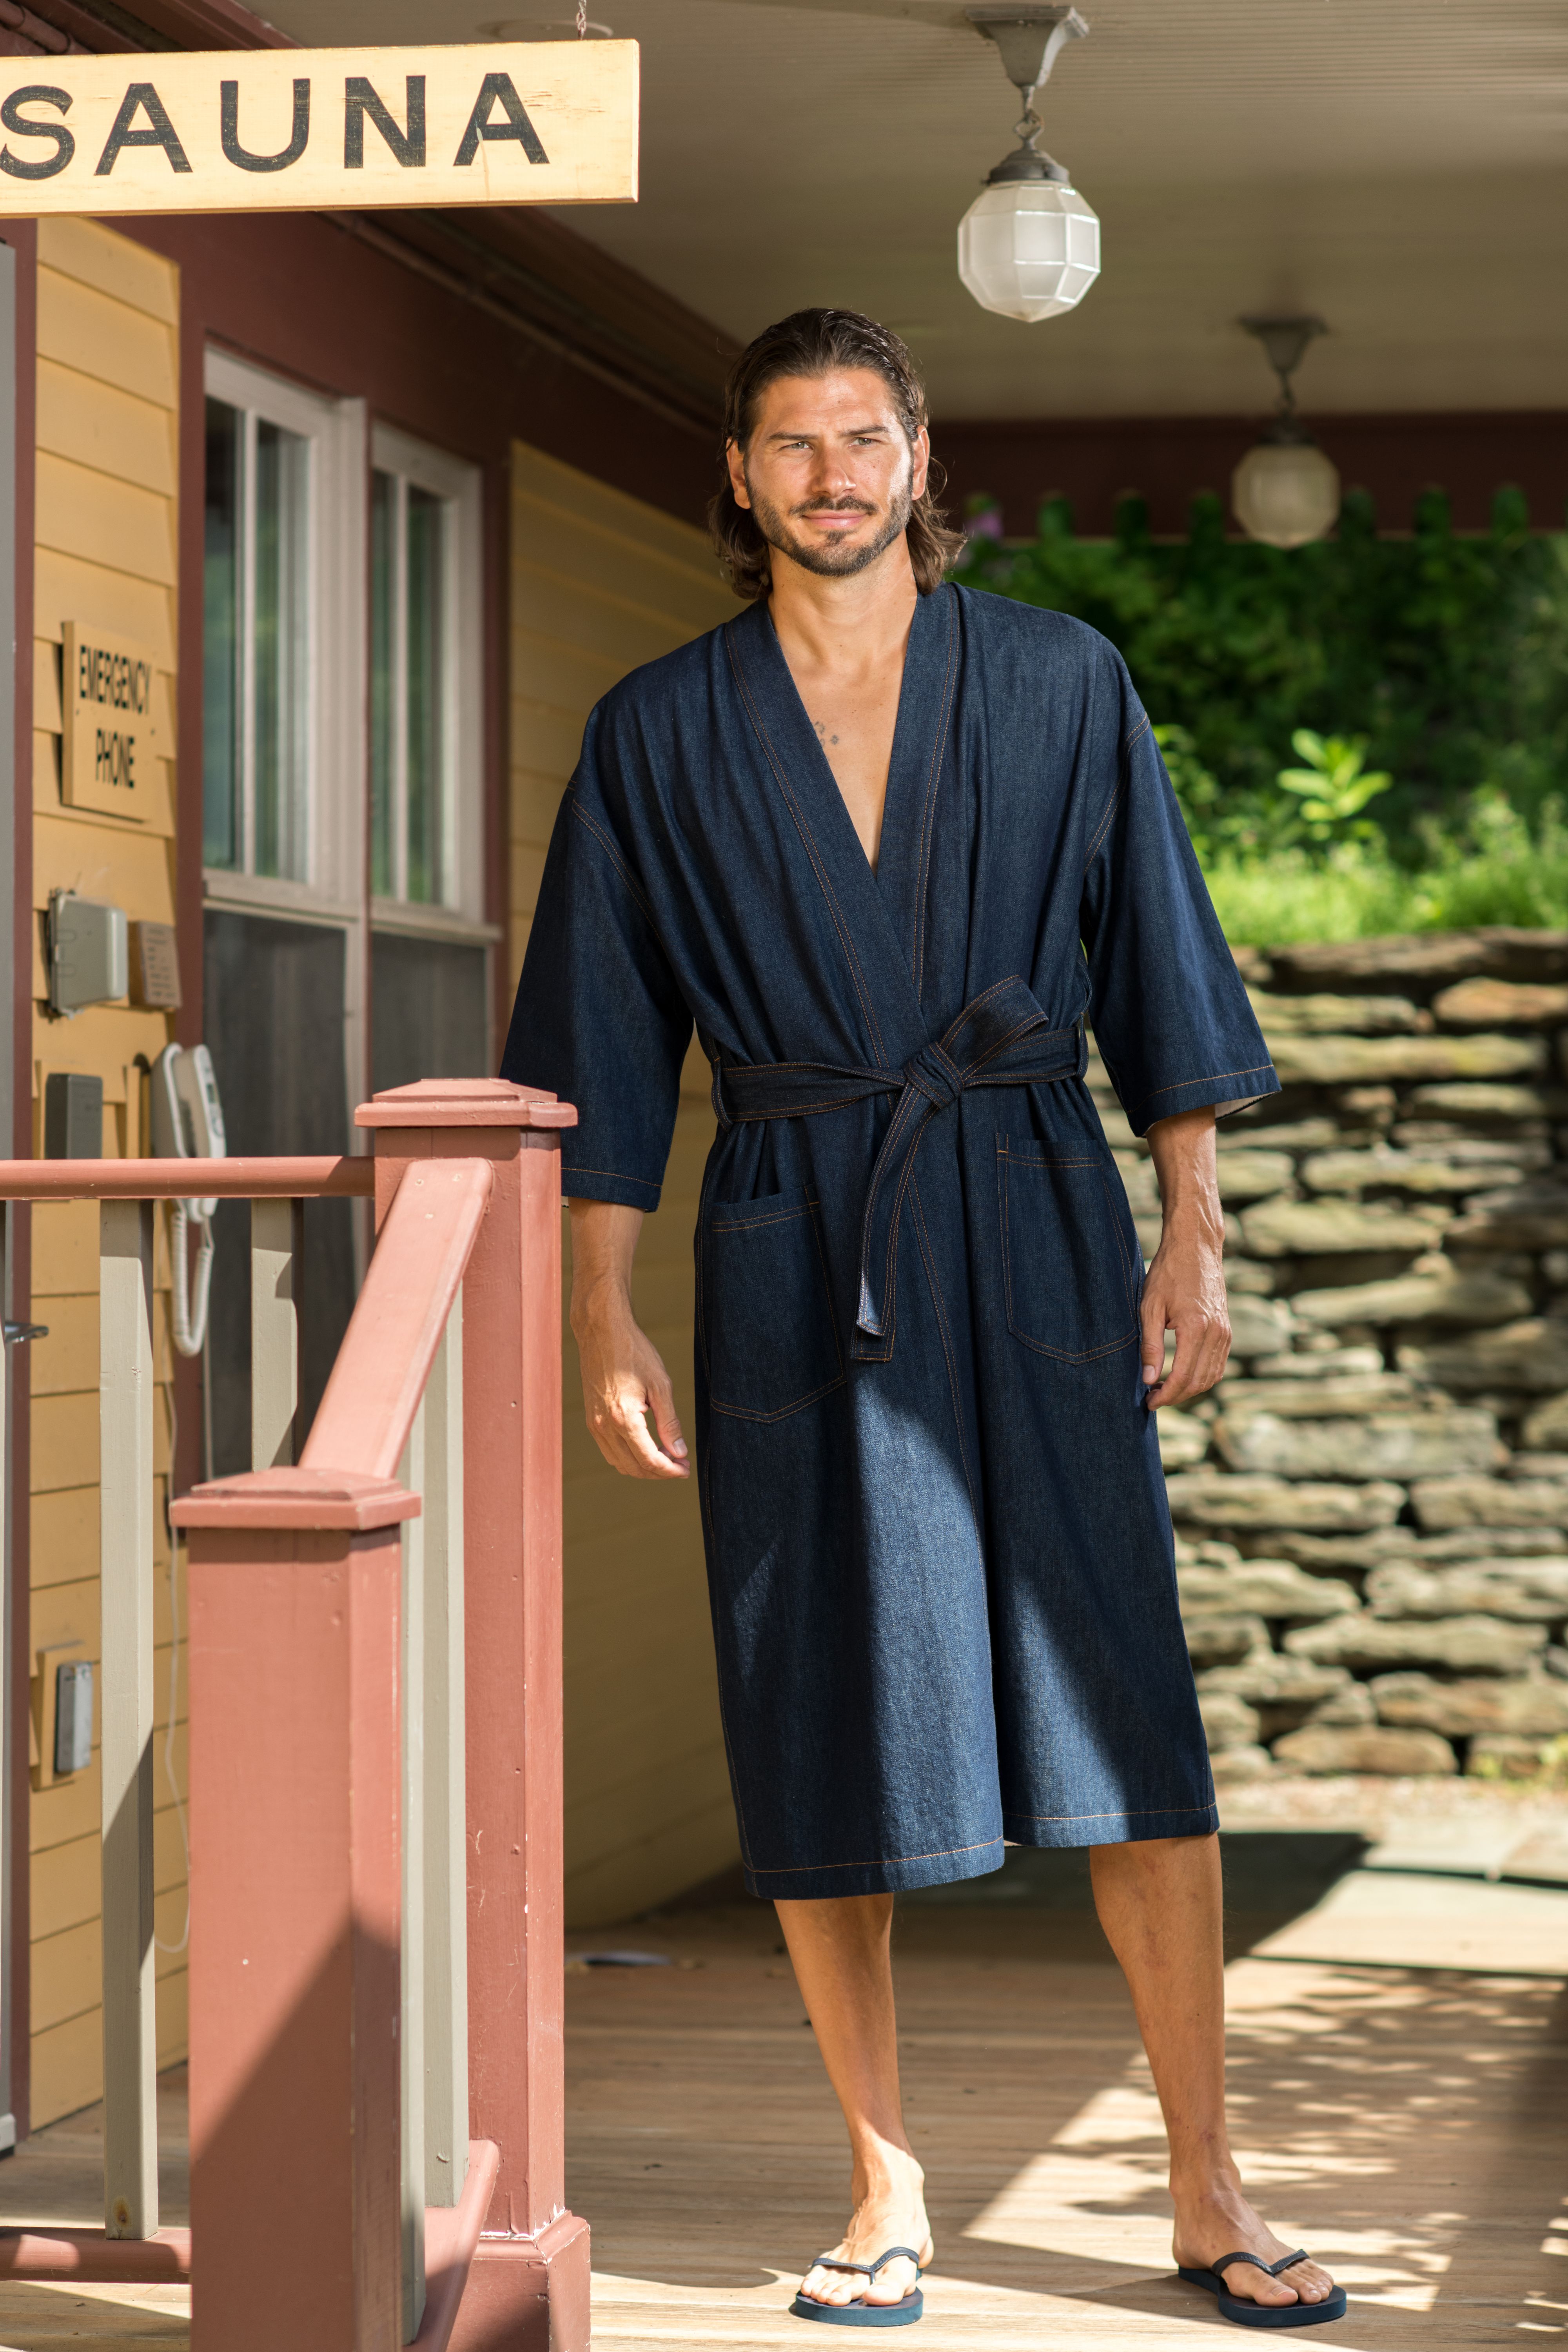 Male model in blue bathrobe stands on porch outside sauna